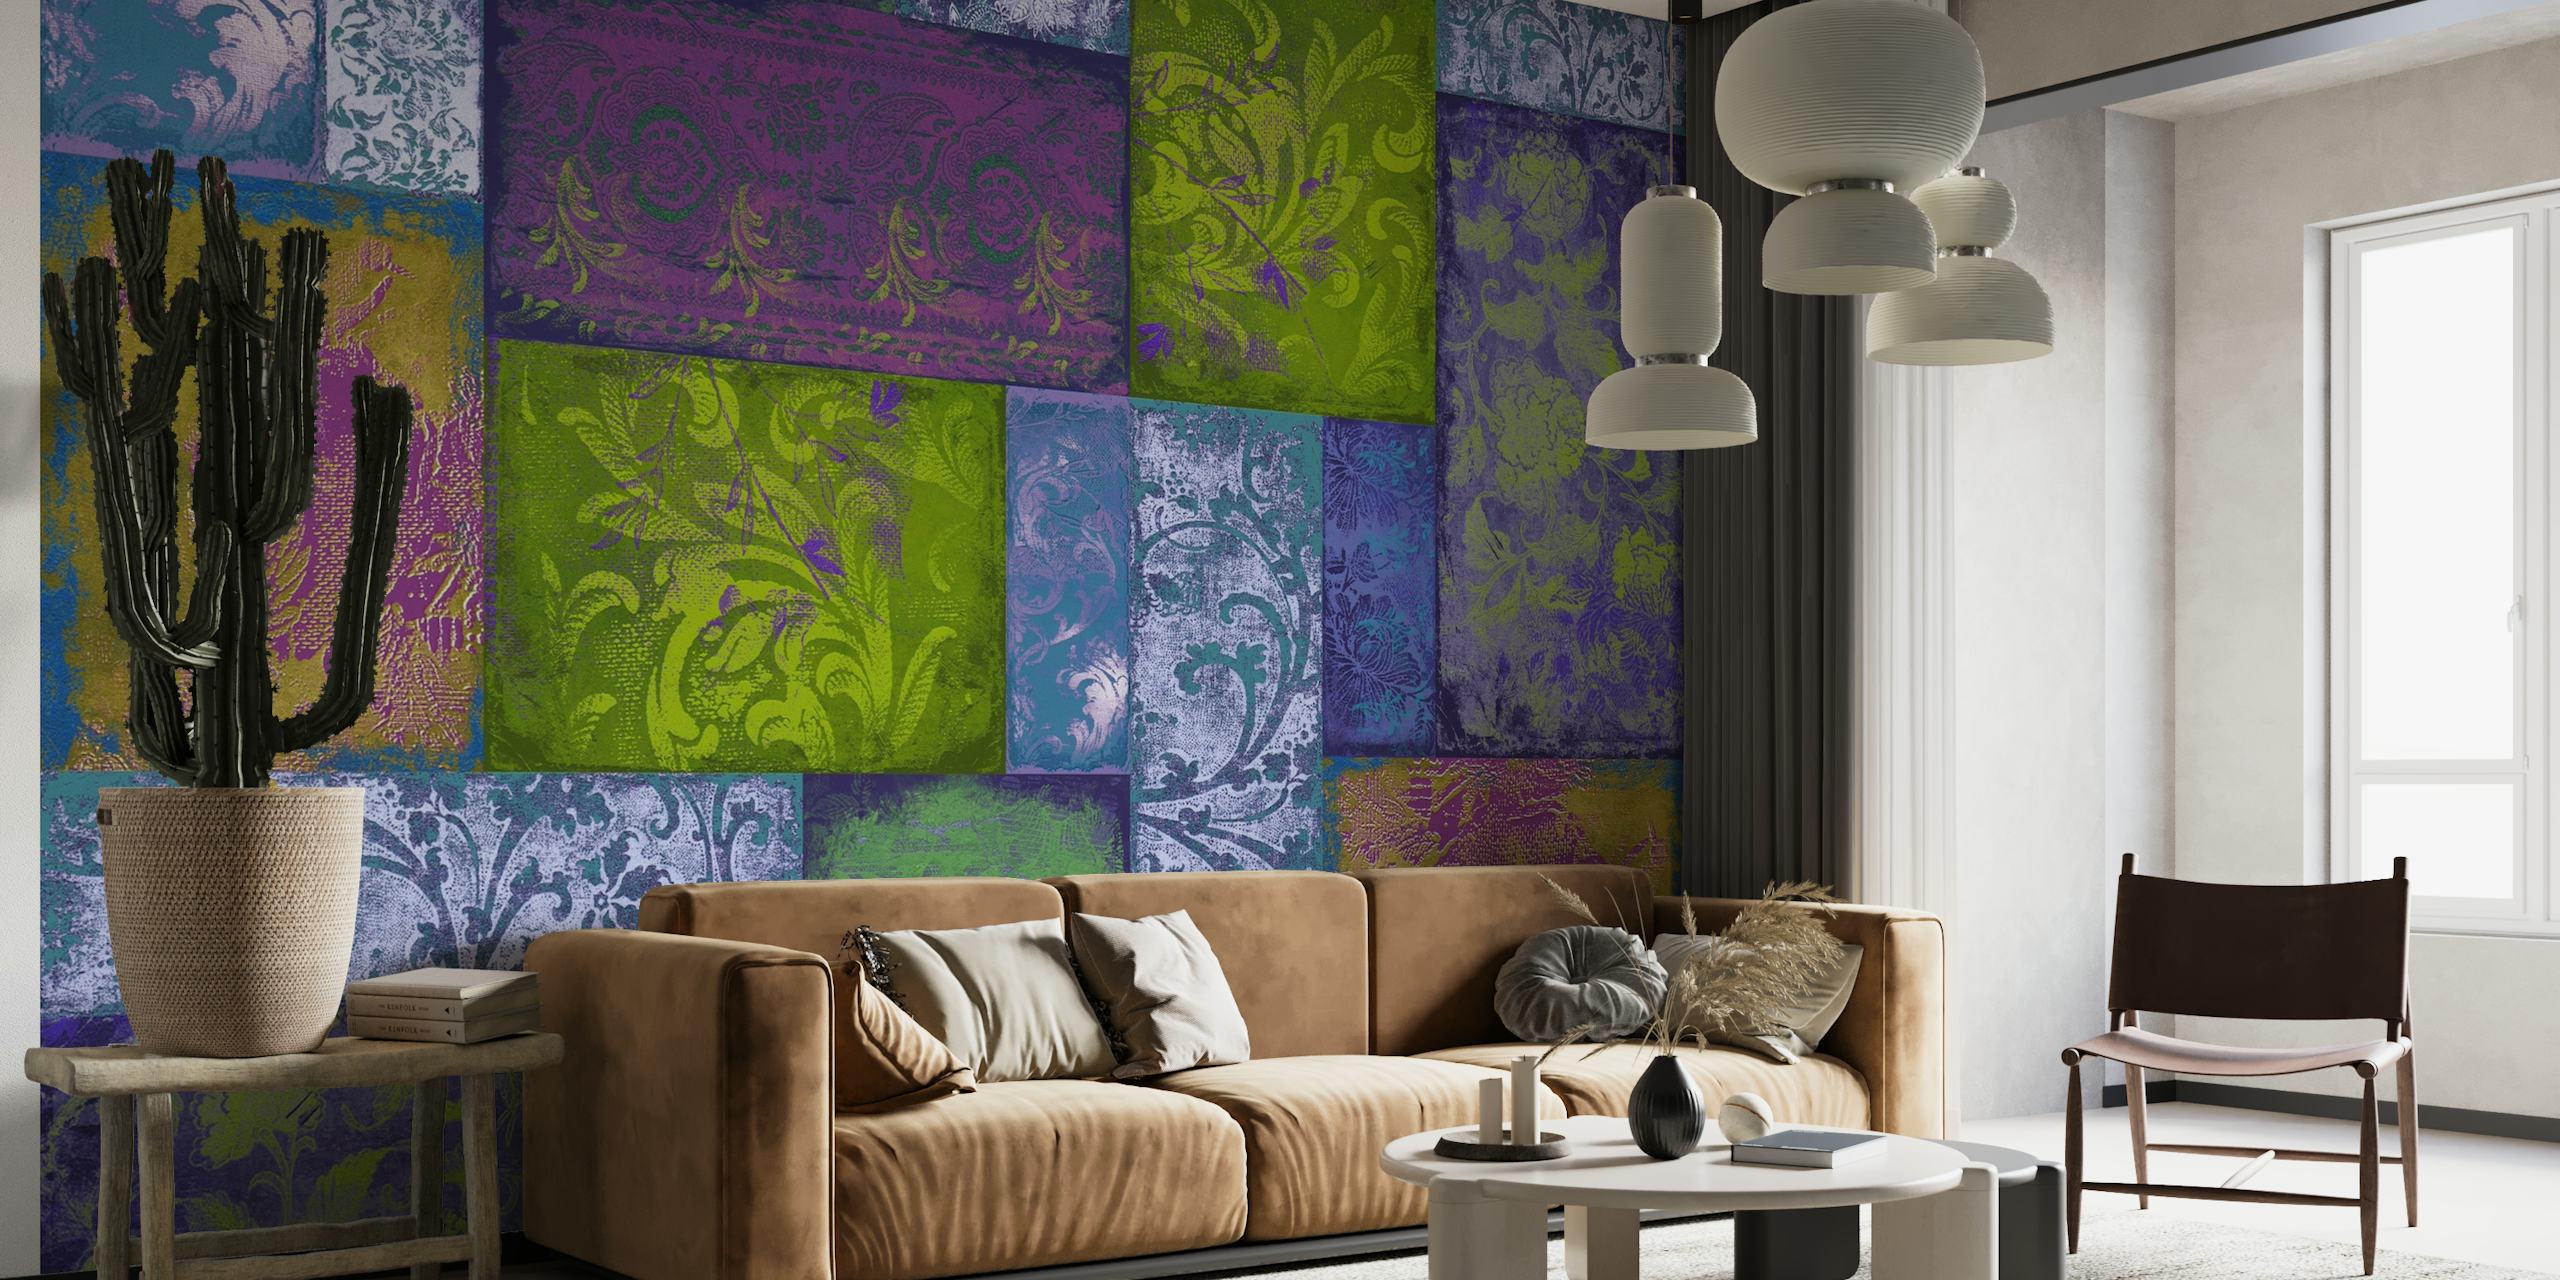 Colorful bohemian patchwork wall mural with intricate designs and textures